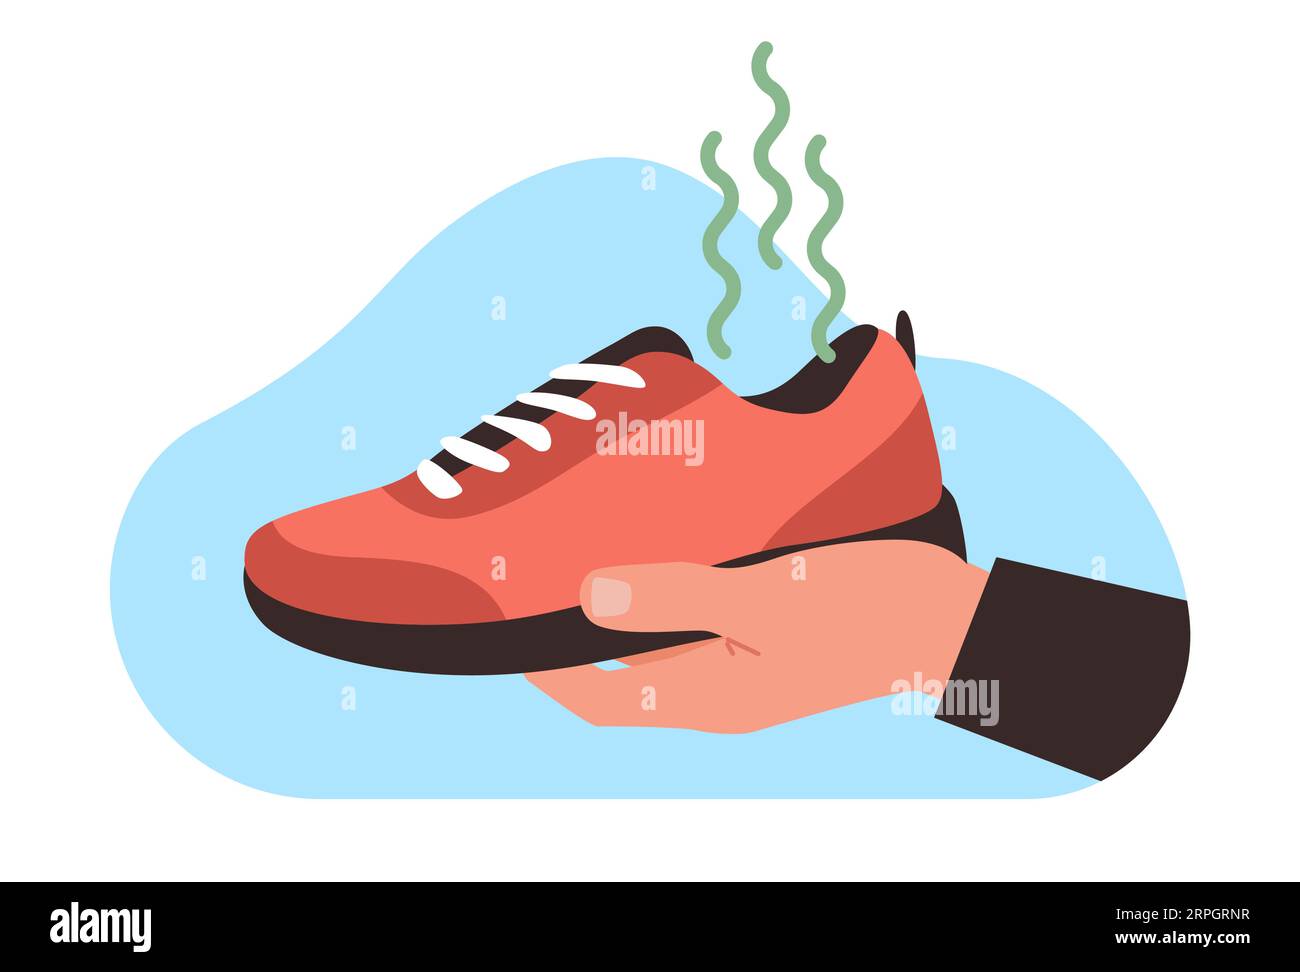 Man holds his shoes in his hand with very bad and unpleasant odor. Smelly shoe, dirt sneakers, mens old boots. Cleaning service image. Cartoon flat st Stock Vector